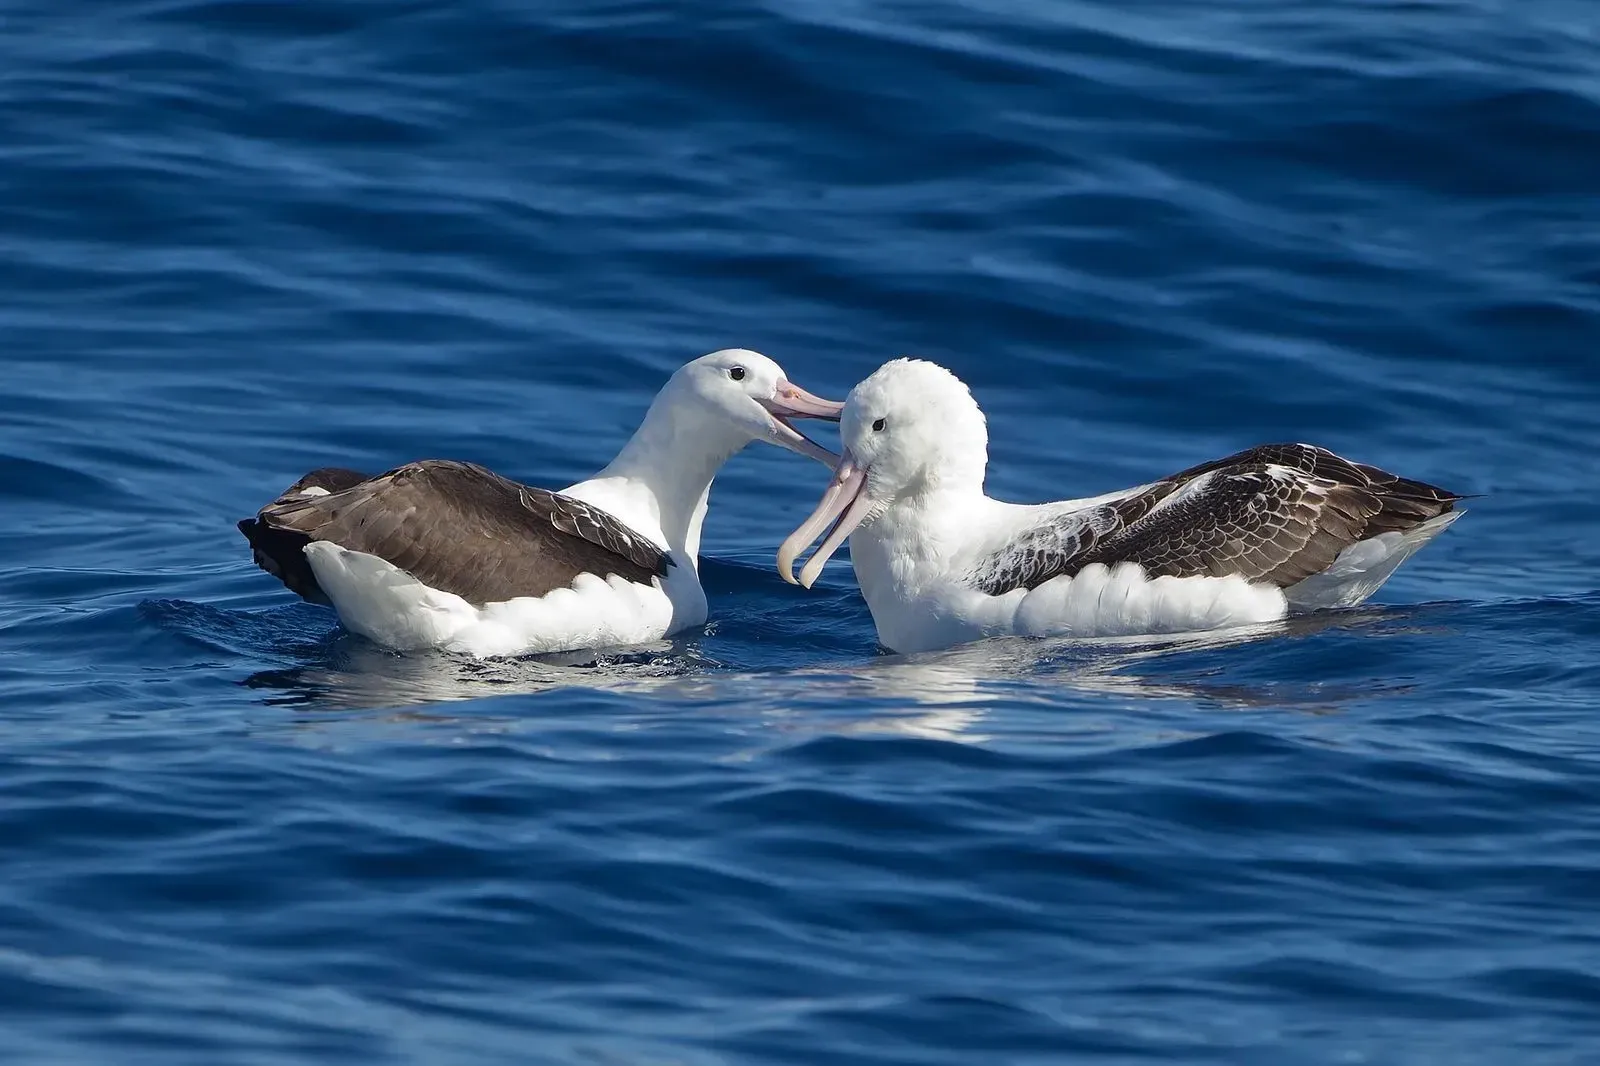 The average wingspan of this albatross population measures the length of a tiger.